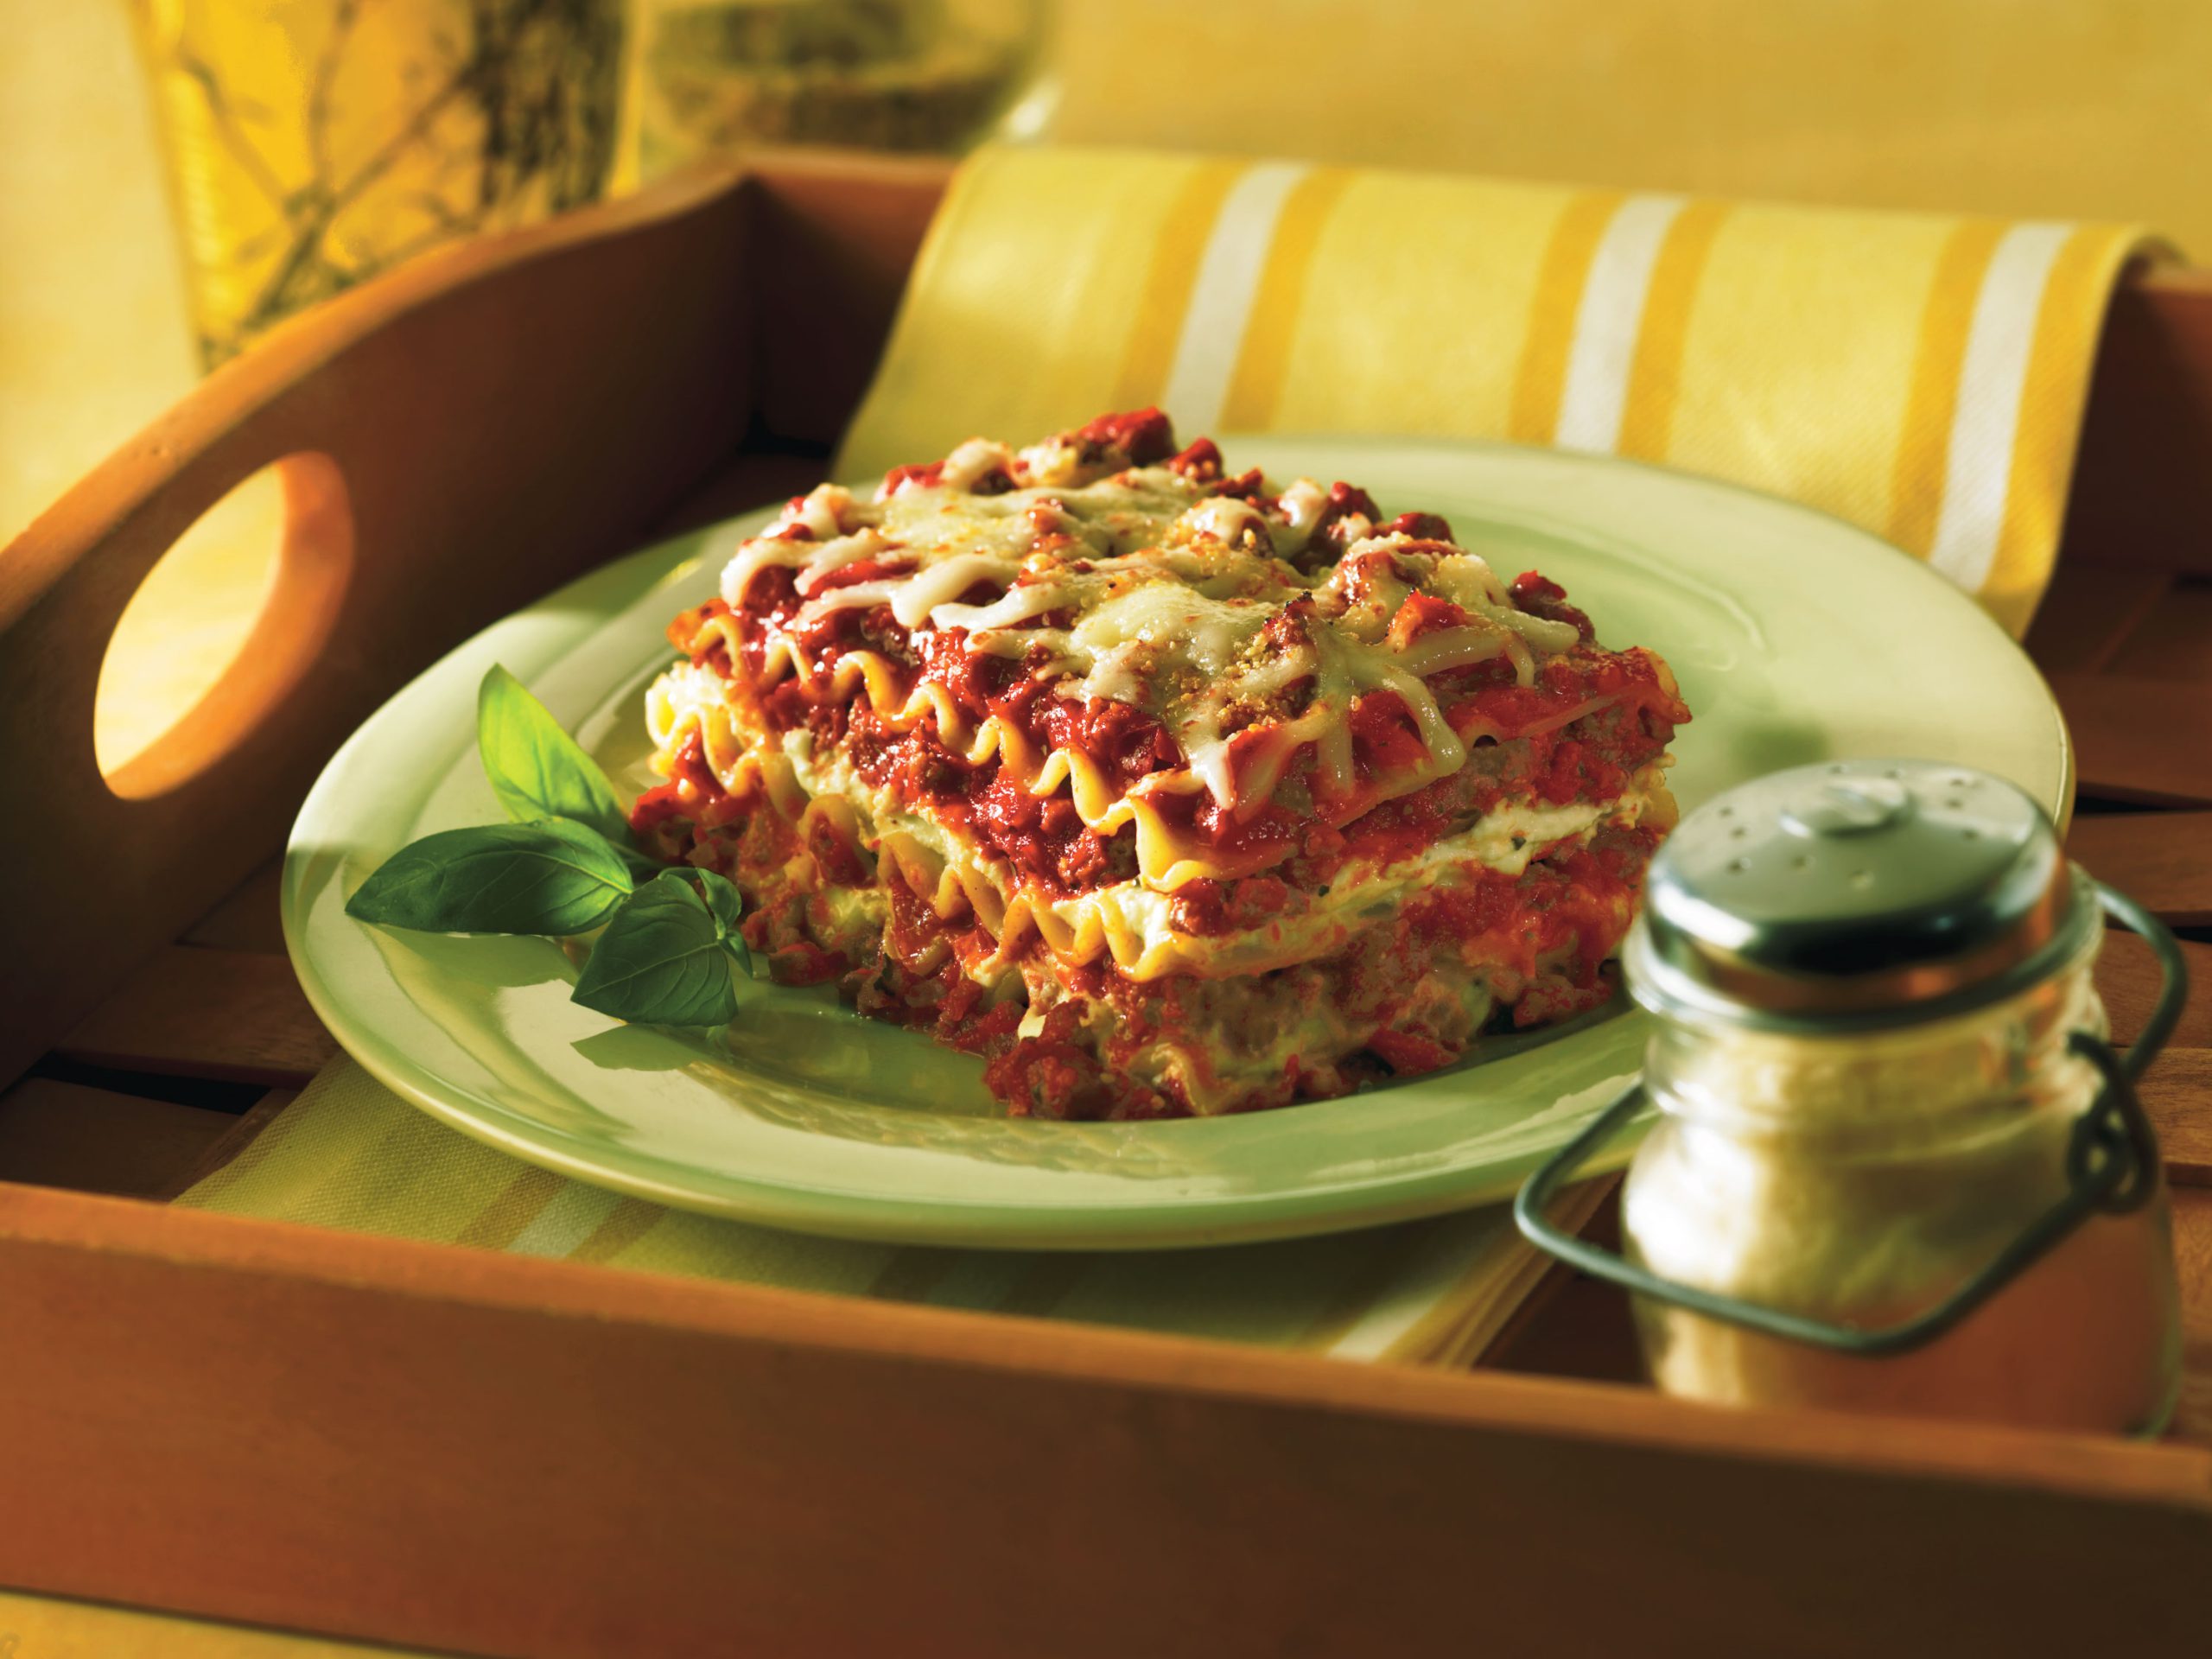 No-boil classic lasagna with layers of noodles, tomato sauce, ground beef, and cheese